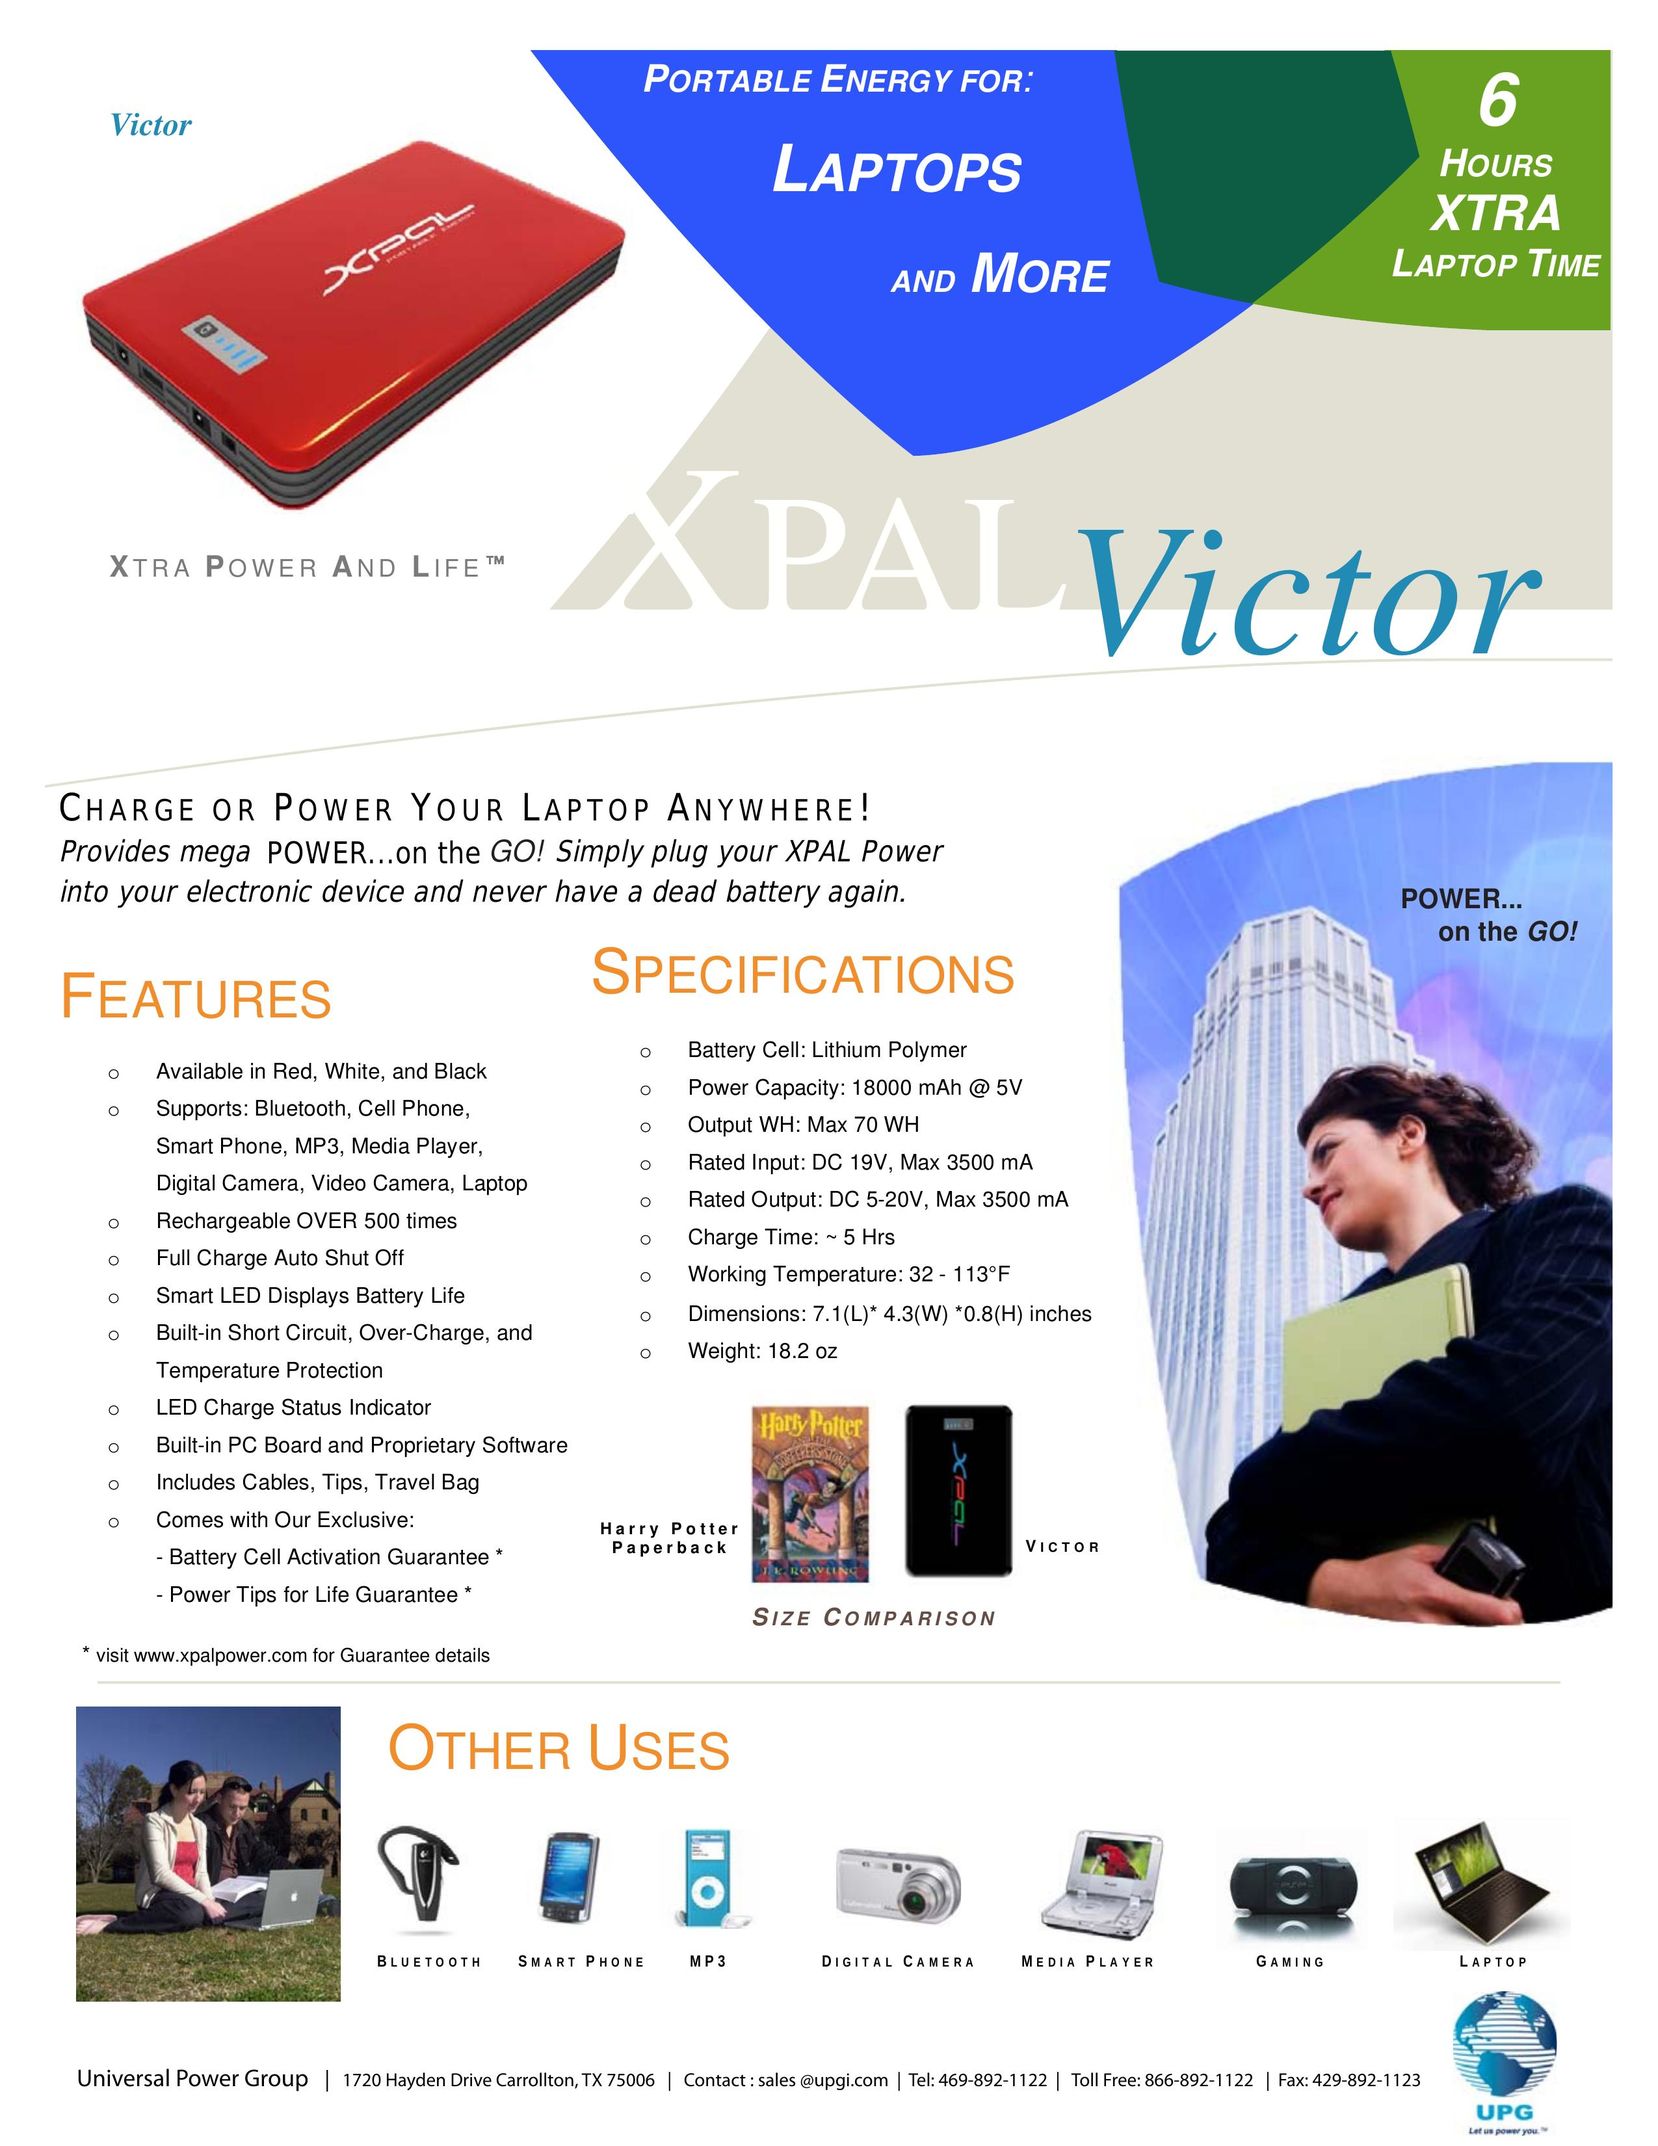 Universal Power Group XPAL Victor Laptop User Manual